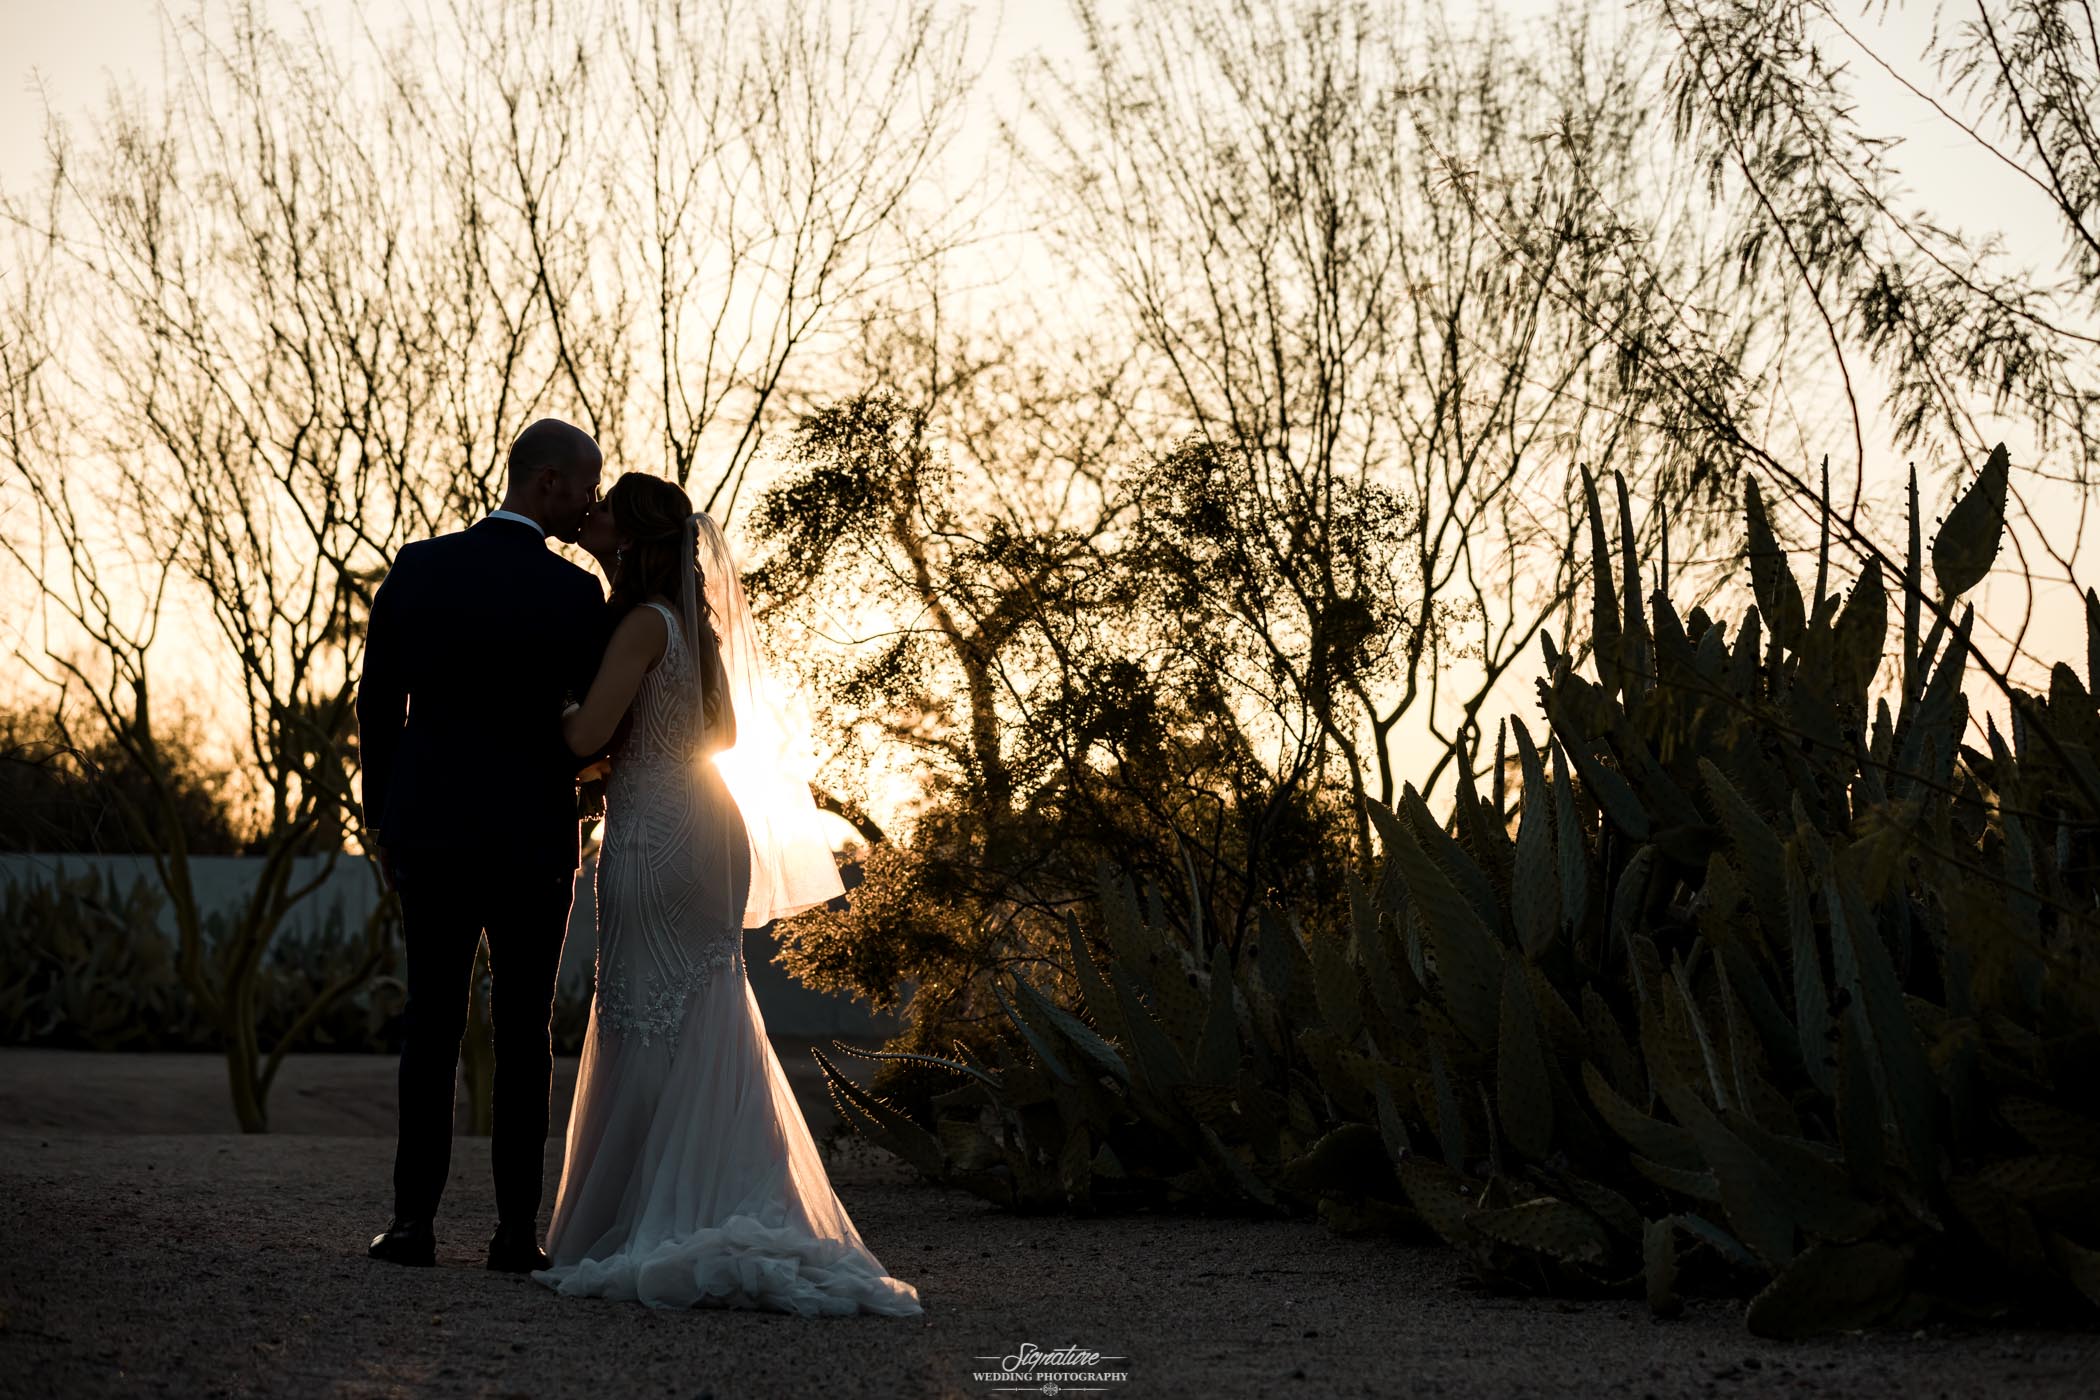 Bride and groom kissing facing away from camera in desert silhouette